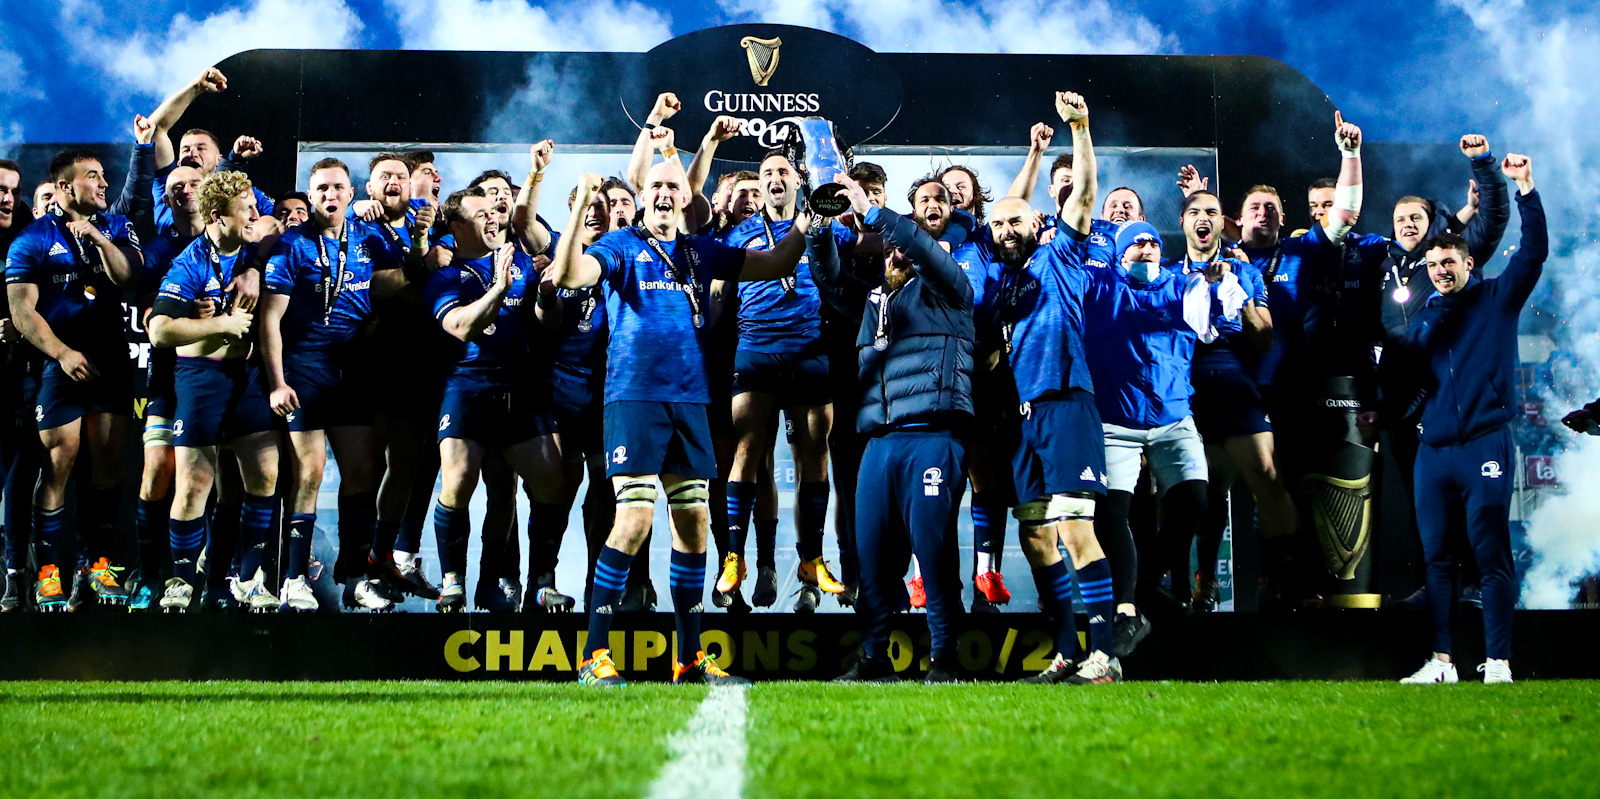 Leinster celebrate after winning the Guinness PRO14 earlier this year.